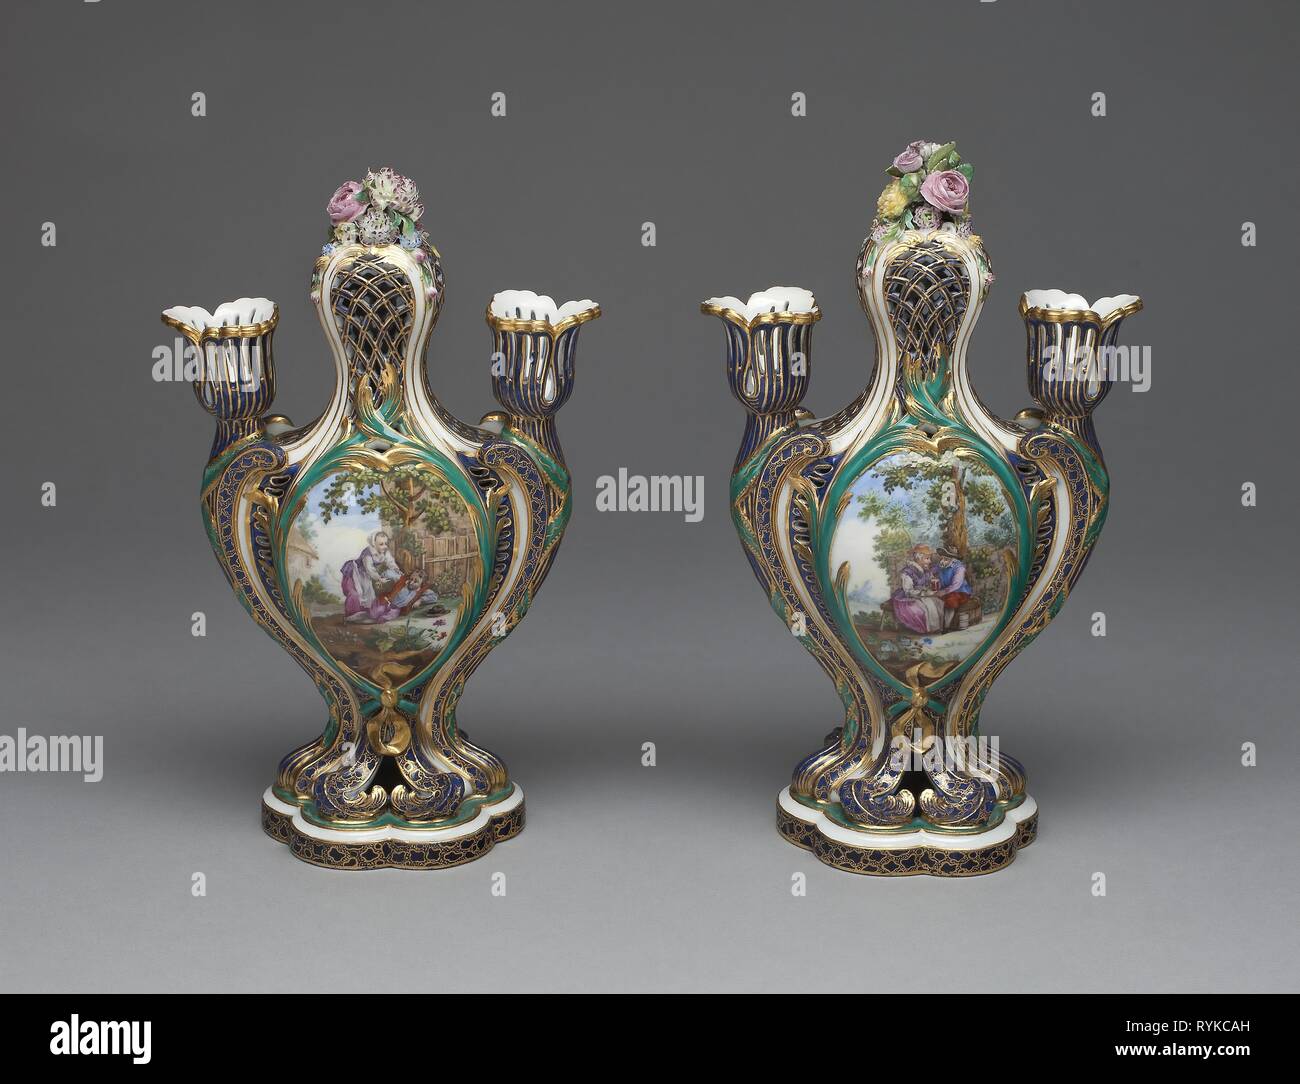 Pair of Vases (Pots Pourris à Bobèches). Sèvres Porcelain Manufactory; French, founded 1740; Designed by Jean-Claude Duplessis; (French, fl. 1745/48-1774, died 1783); Painted by André-Vincent Vieillard (attributed to); (French, 1717-90, active 1752-90). Date: 1754-1764. Dimensions: 1994.371.1: H. 24.1 cm (9 1/2 in.)  1994.371.2: H. 25.2 cm (9 7/8 in.). Soft-paste porcelain, polychrome enamels, and gilding. Origin: Sèvres. Museum: The Chicago Art Institute, Chicago, USA. Author: Manufacture nationale de Sevres. Stock Photo